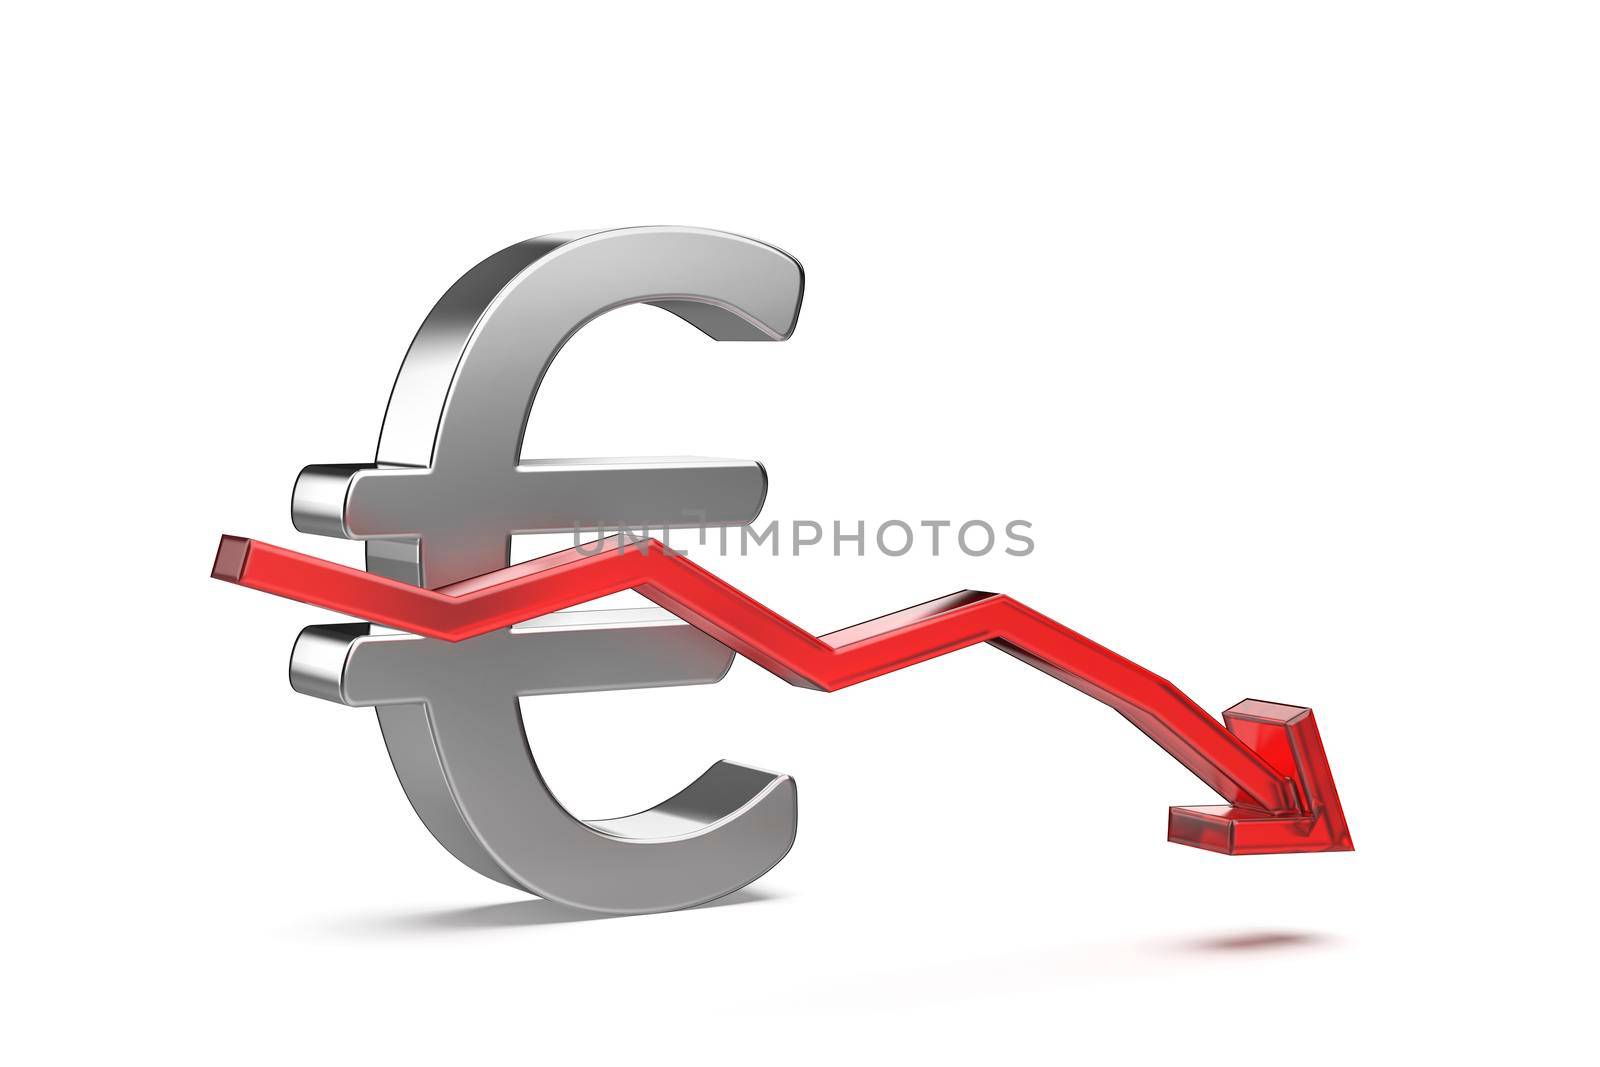 Euro symbol with red arrow pointing down by magraphics